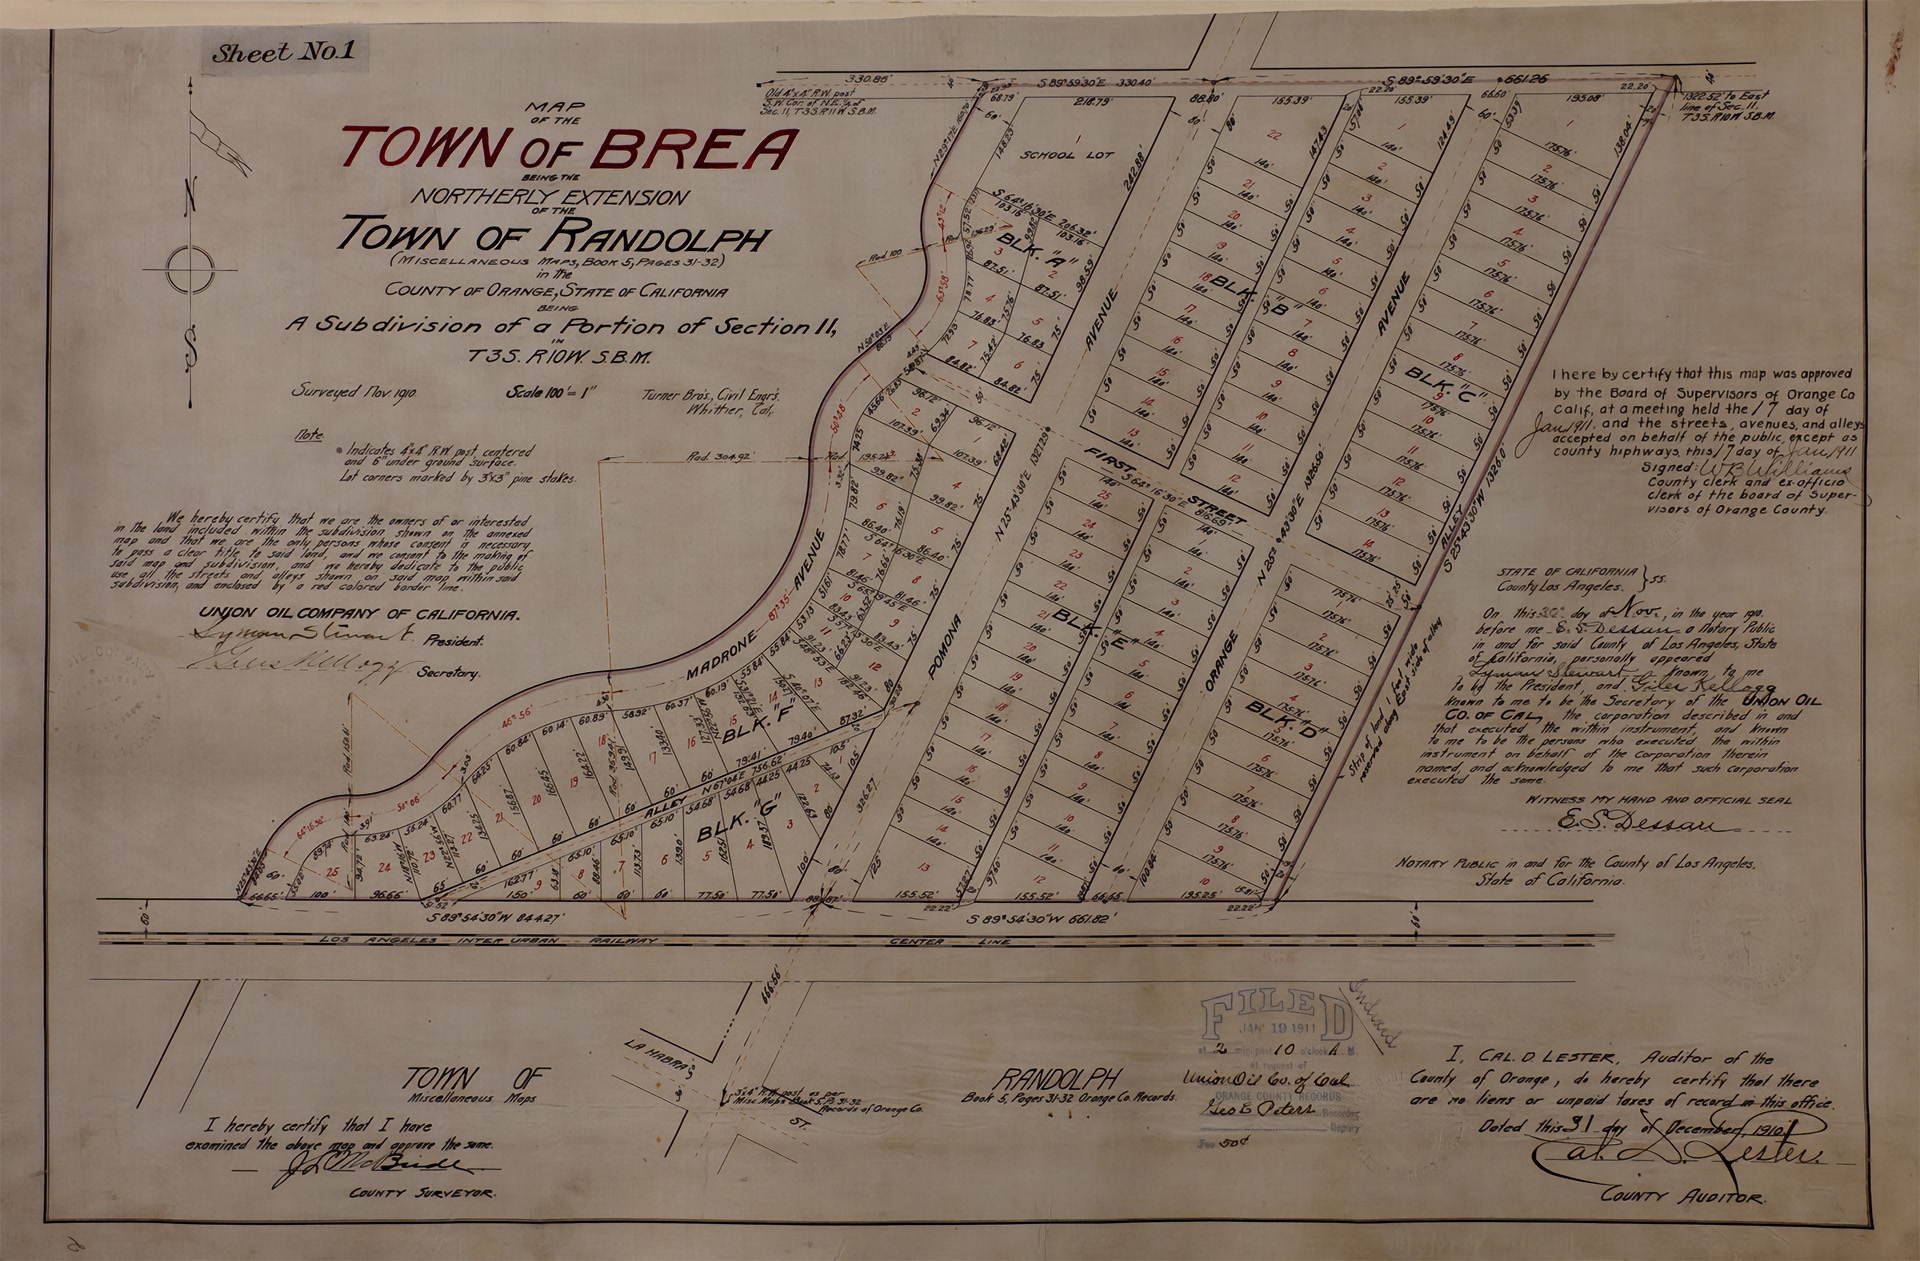 On January 19, 1911, W.J. Hole filed a new map with the County Recorder, changing the name to Brea and expanding the town by several blocks. In 1917, Brea was incorporated into Orange County.